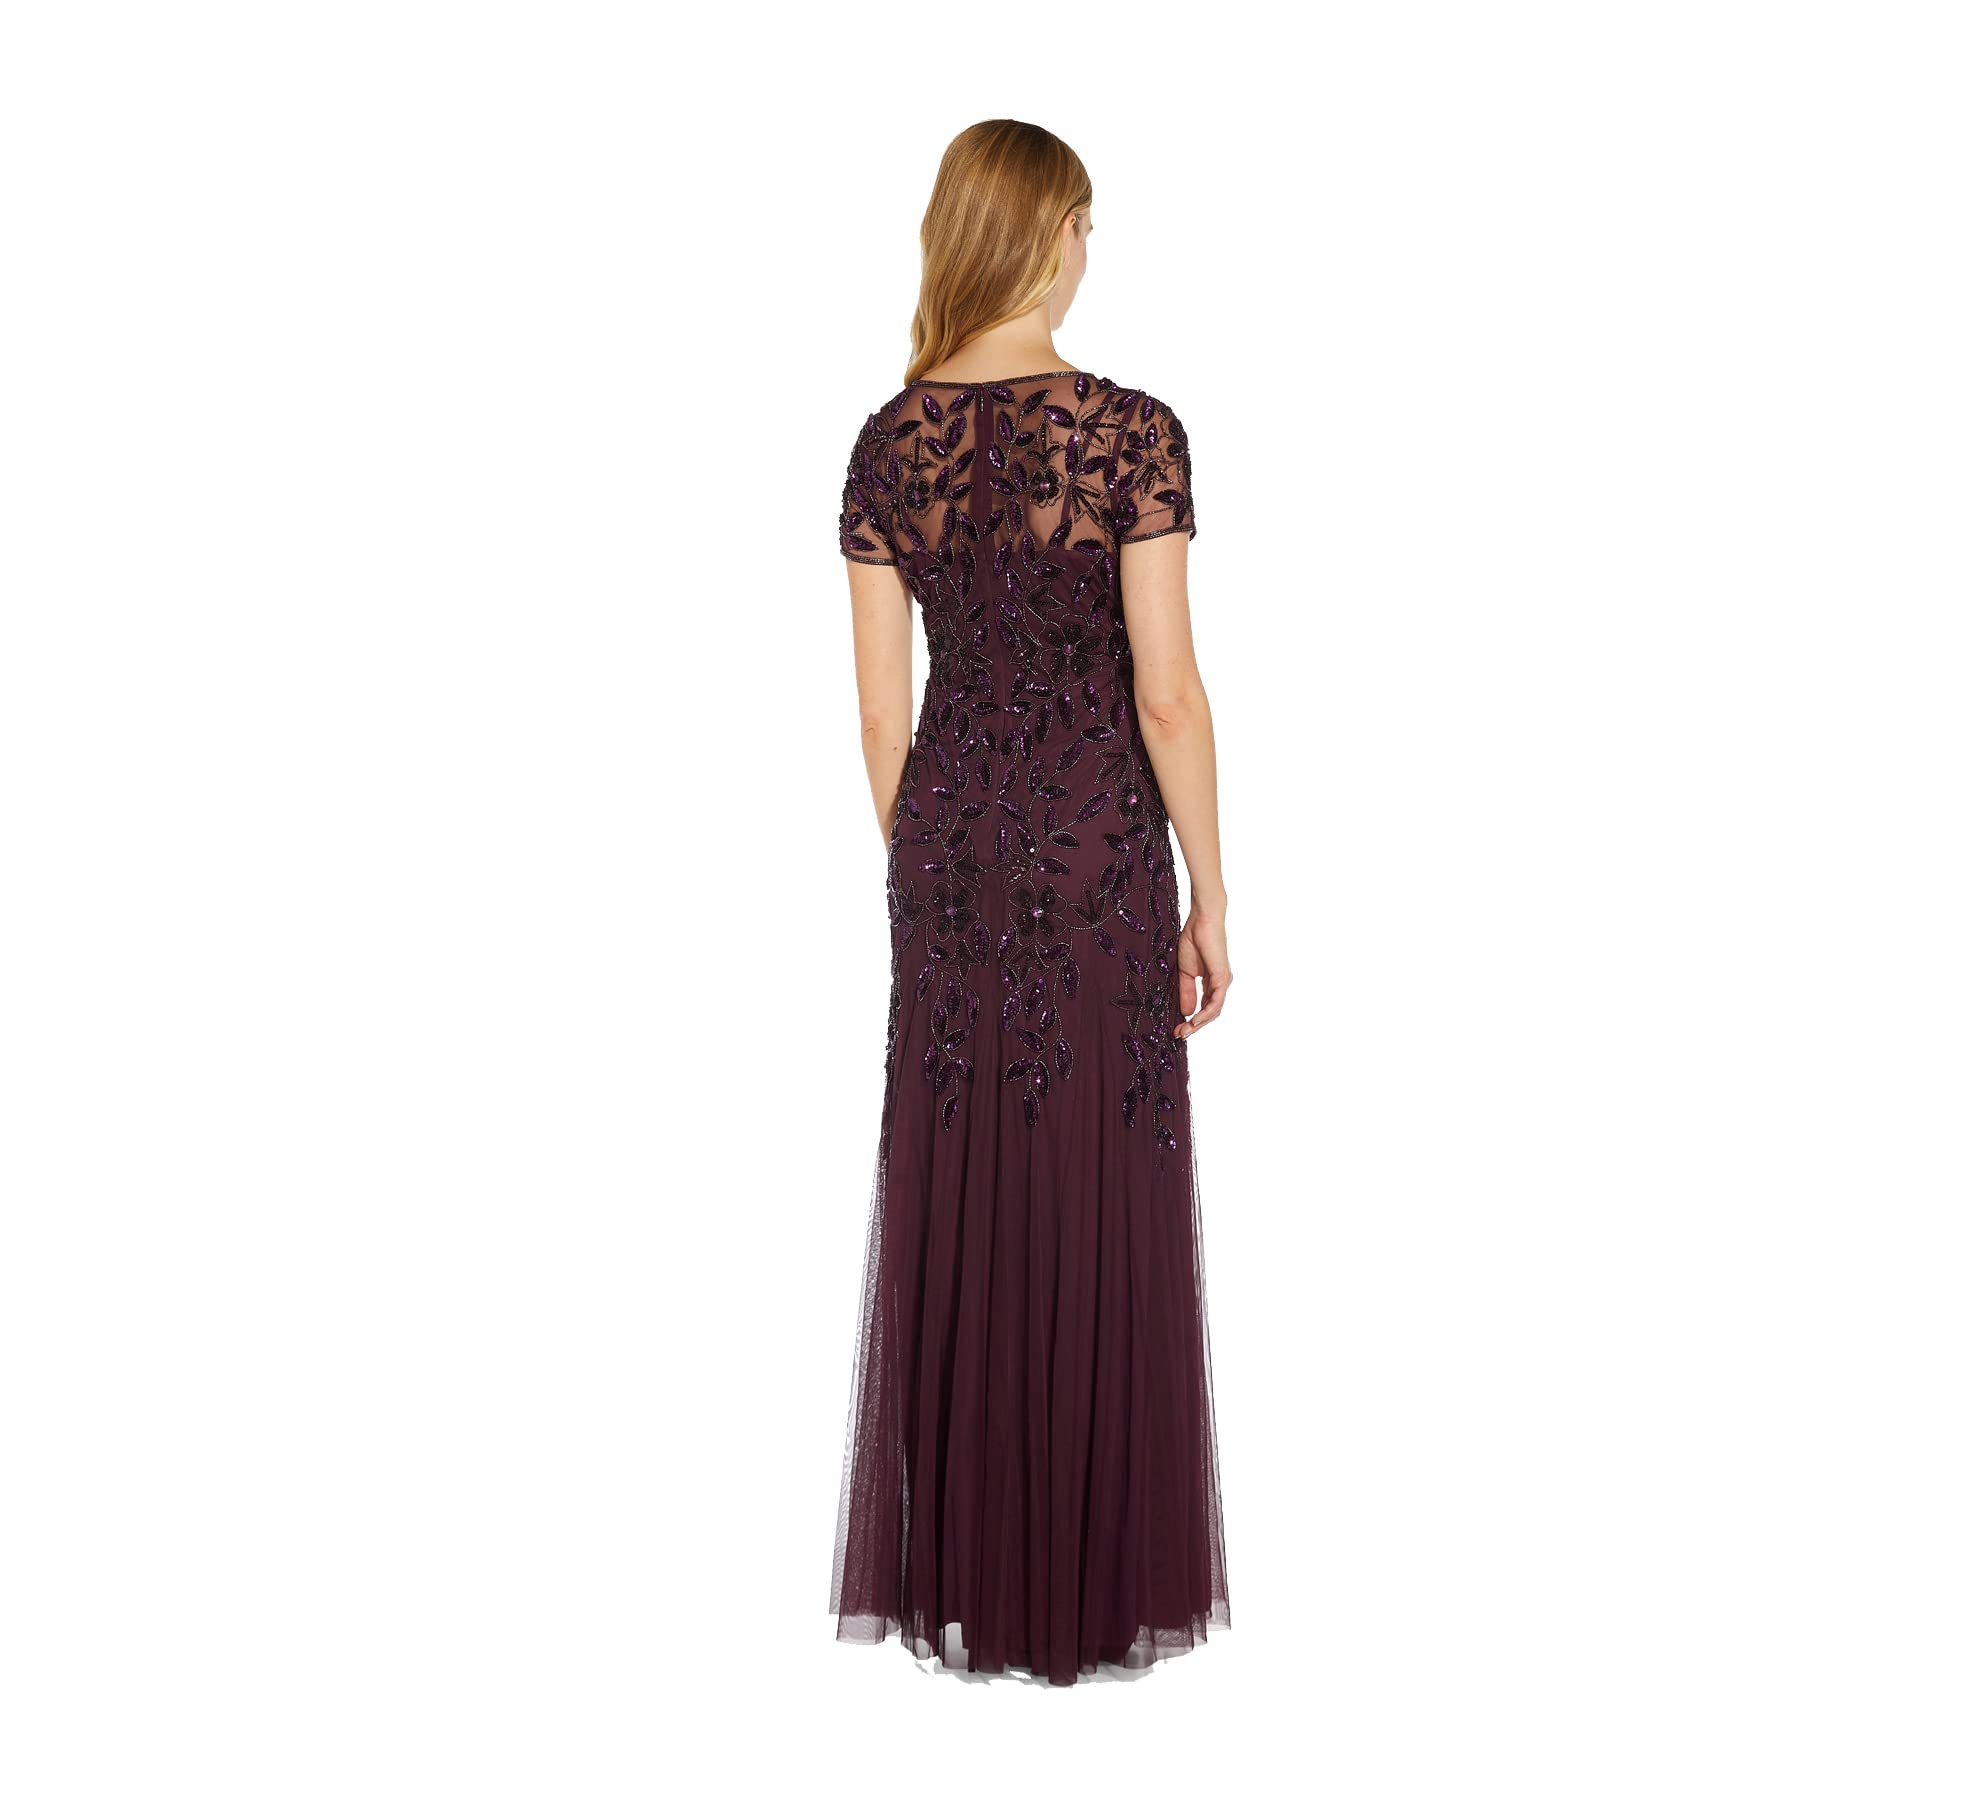 Adrianna Papell Women's Floral Beaded Godet Gown